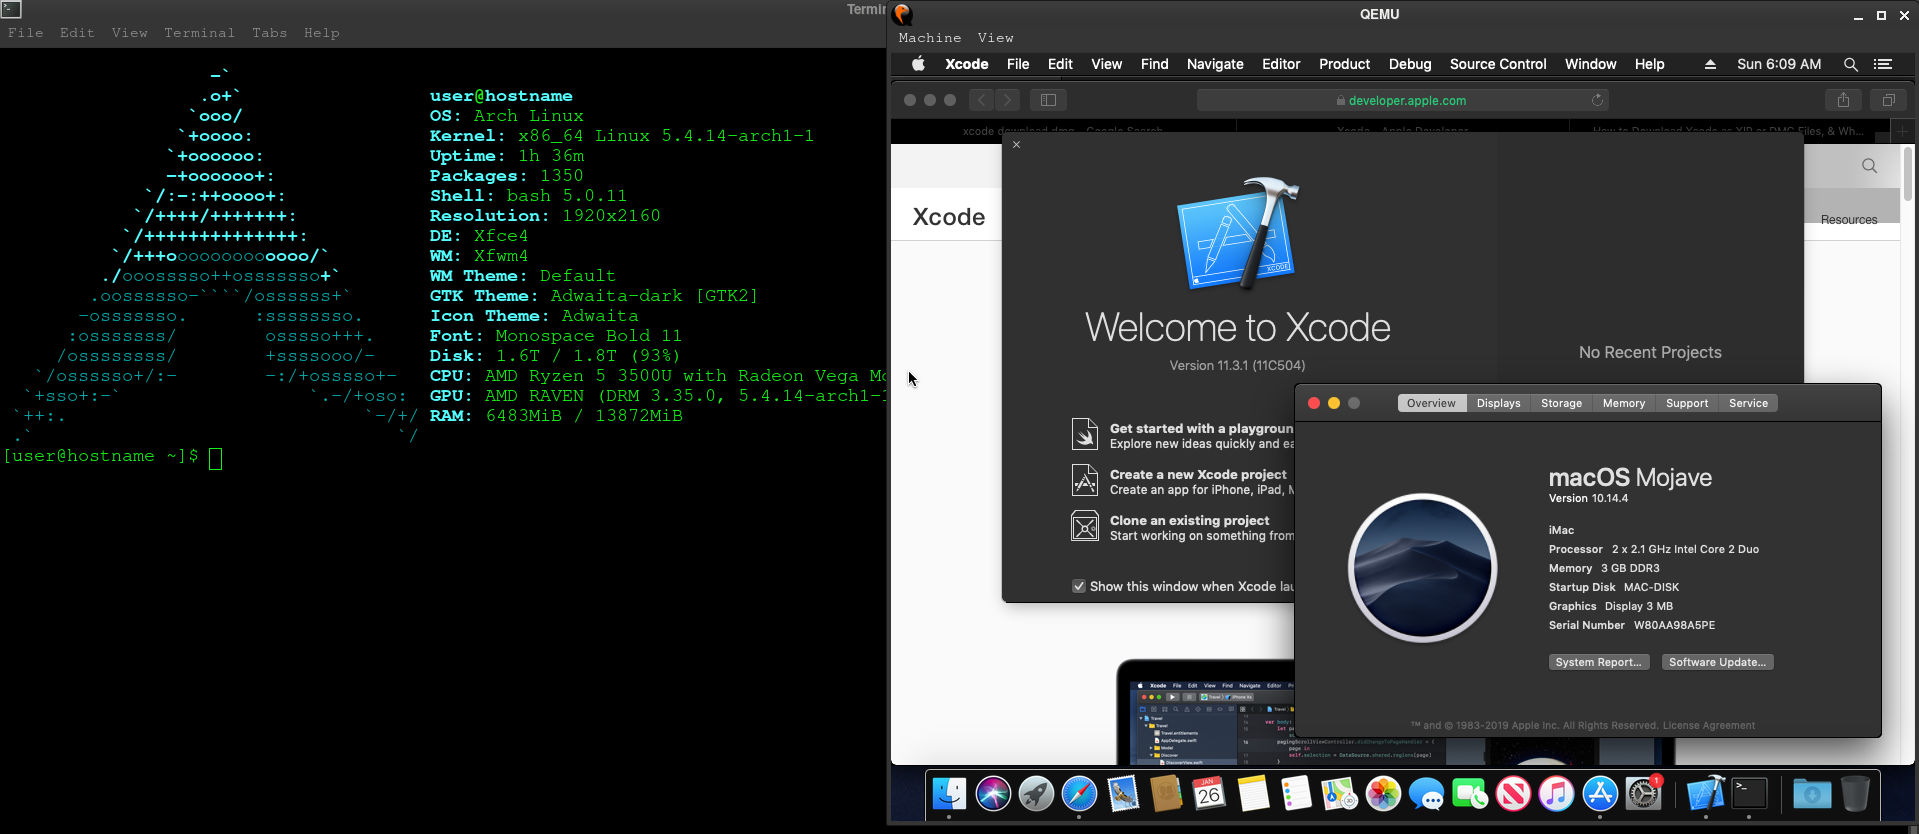 How To Install Macos Virtual Machine On Linux Arch Manjaro Catalina Mojave Or High Sierra Xcode Working Tutorial For Ubuntu Rhel Centos Fedora Sick Codes Security Research Hardware Software Hacking Consulting Linux Iot